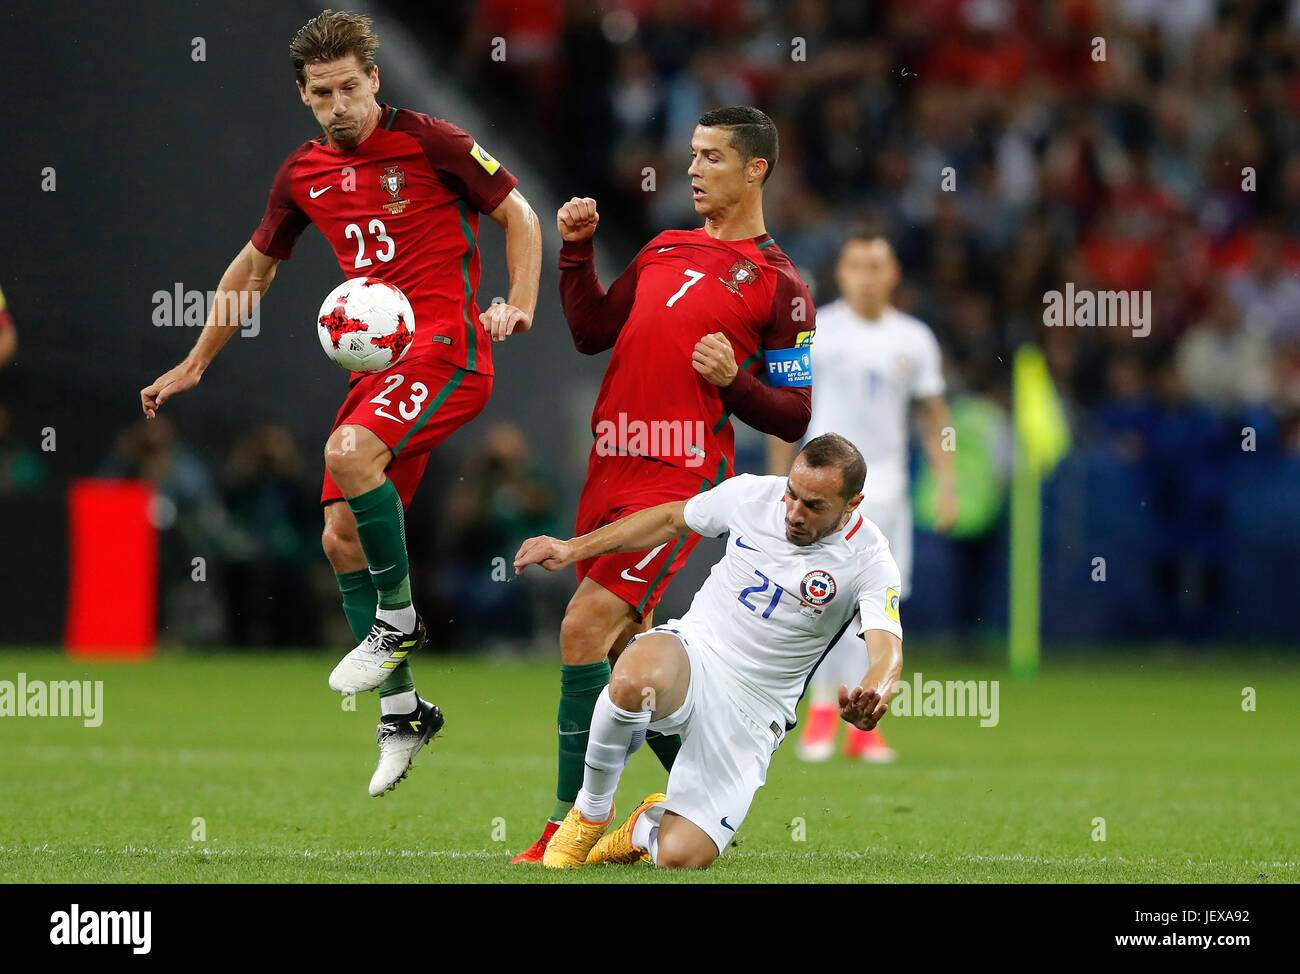 KAZAN, RT - 28.06.2017: PORTUGAL VS CHILE - CEDRIC and CRISTIANO RONALDO of Portugal play for Marcelo DIAZ of Chile during a match between Portugal and Chile valid for the semifinals of the Confederations Cup 2017 on Wednesday (28th) held at Kazan Arena Stadium in Kazan, Russia . (Photo: Rodolfo Buhrer/La Imagem/Fotoarena) Stock Photo